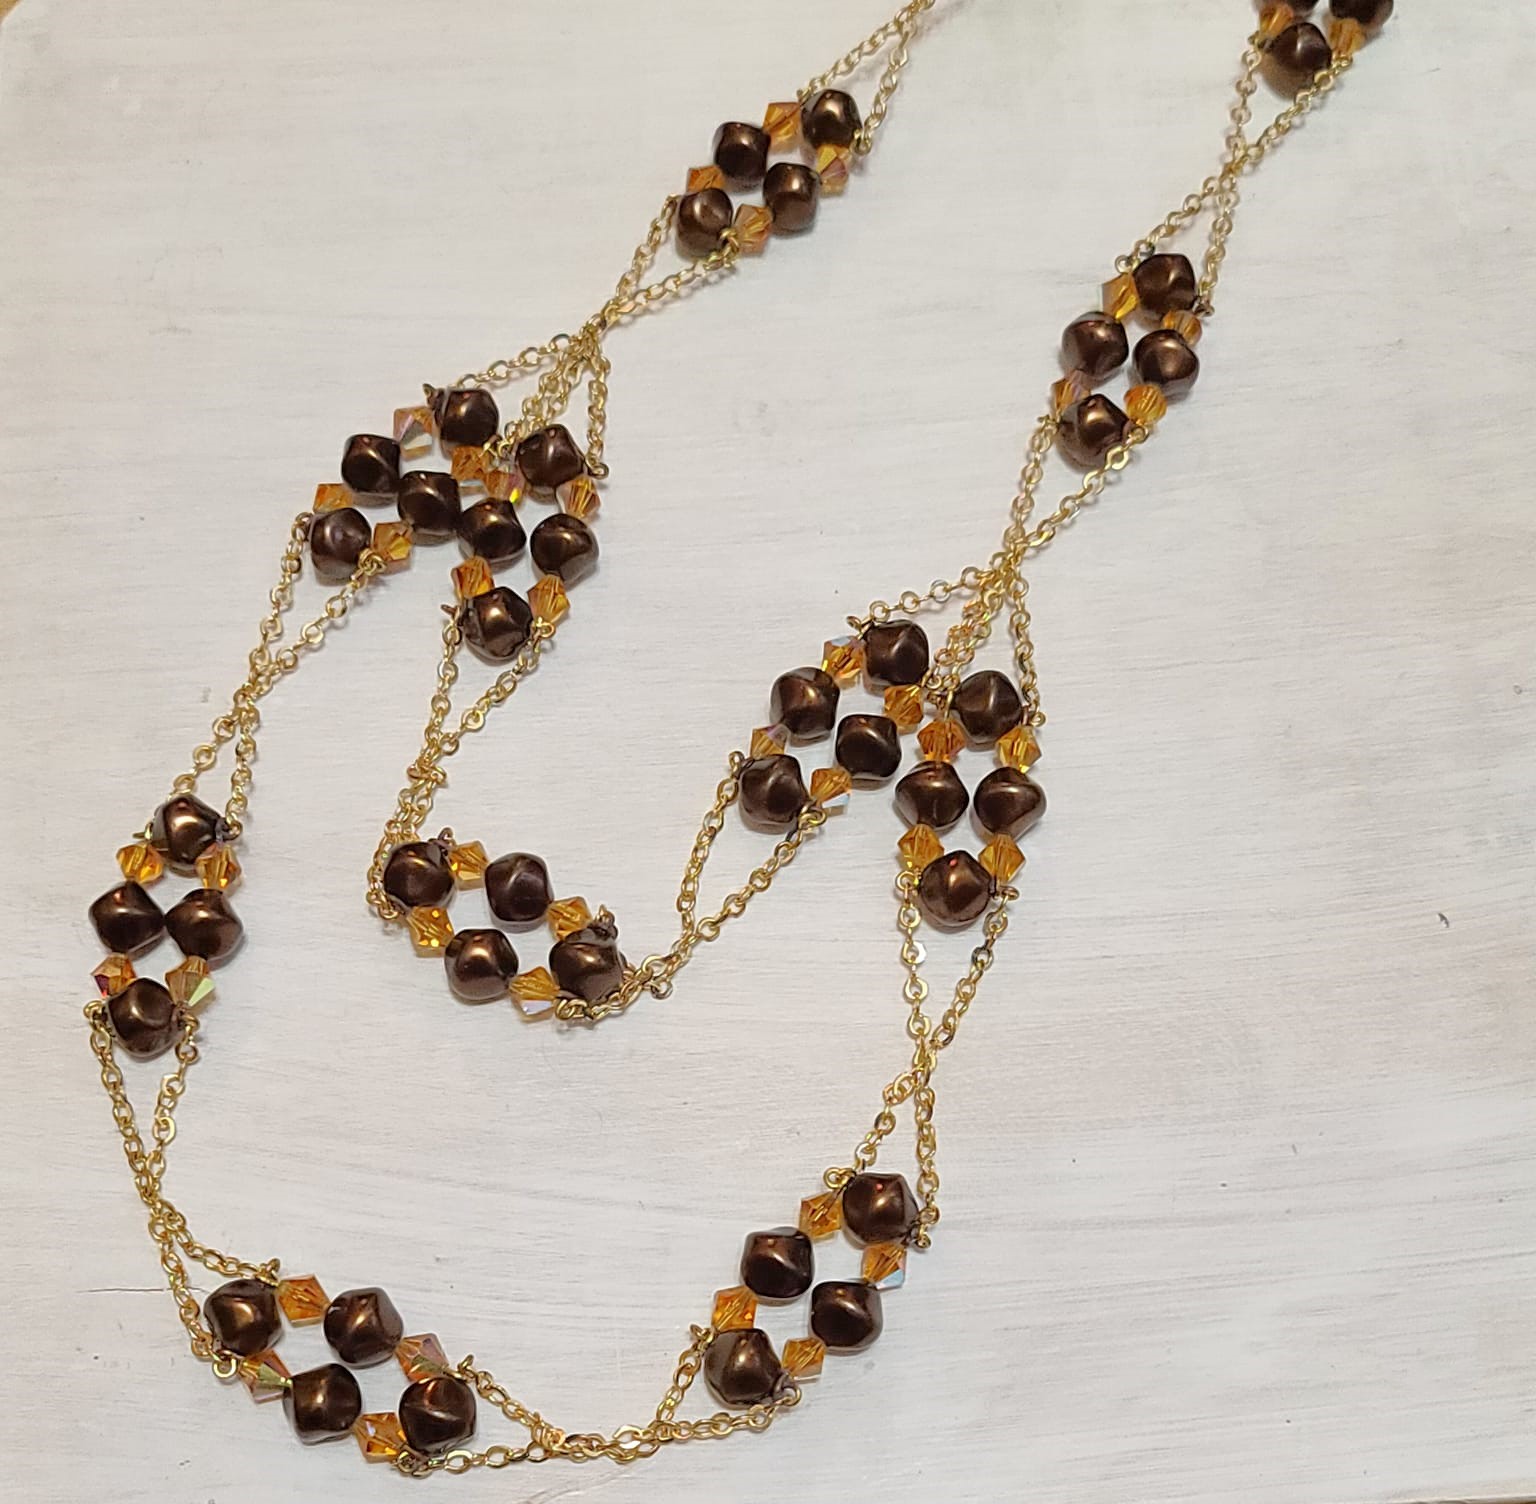 Czech Glass Long Necklace in Brown Tones